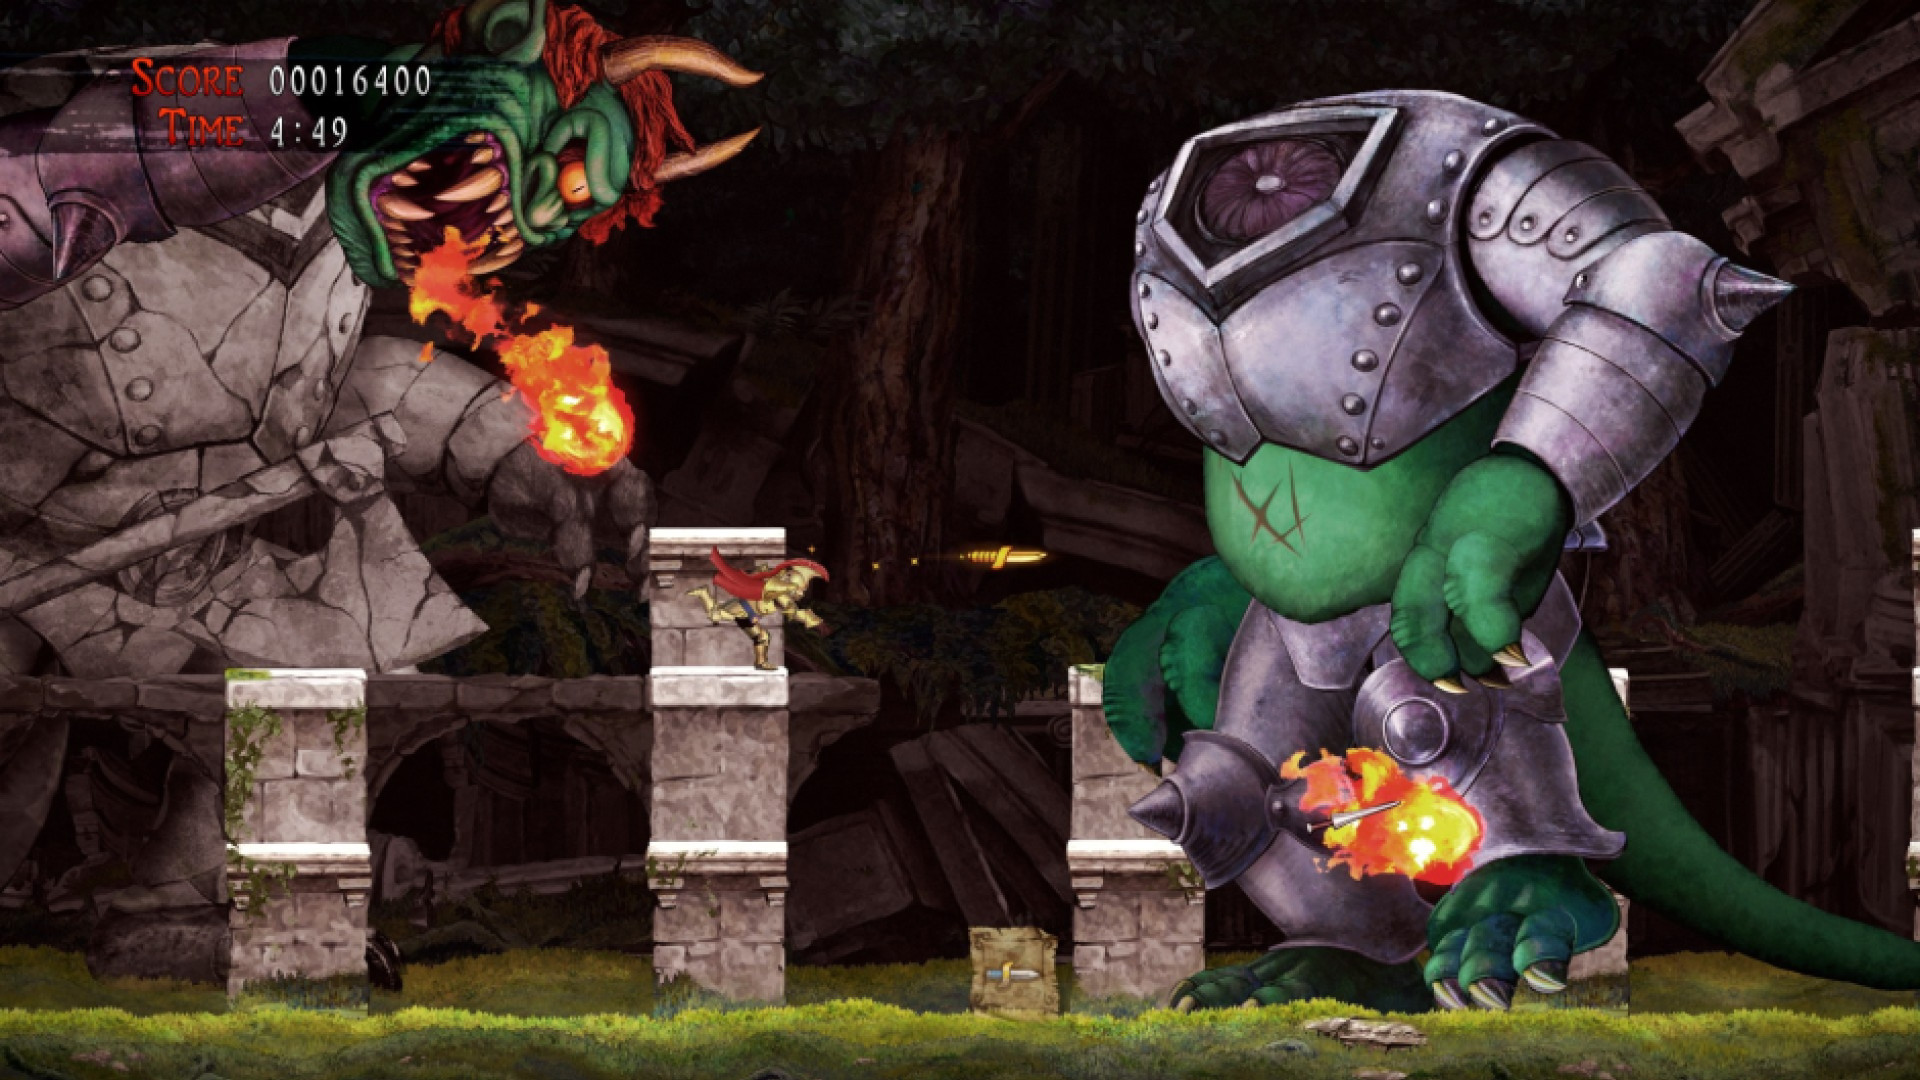 Ghosts 'n Goblins Resurrection – May 31